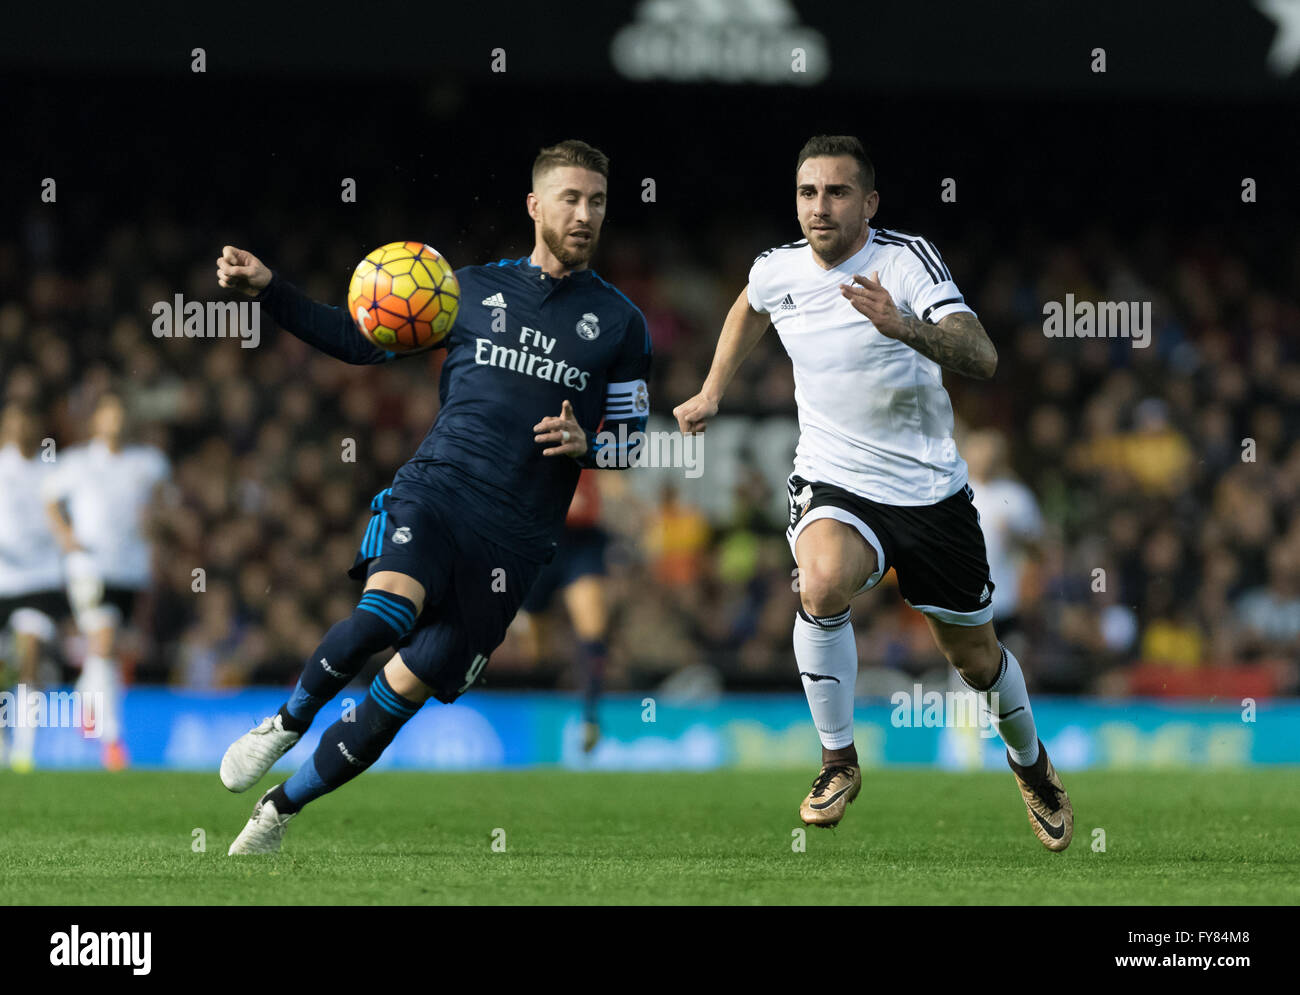 Paco Alcacer of Valencia CF and Sergio Ramos of Real Madrid CF fighting to the ball during the Liga BBVA match, at Mestalla. Stock Photo